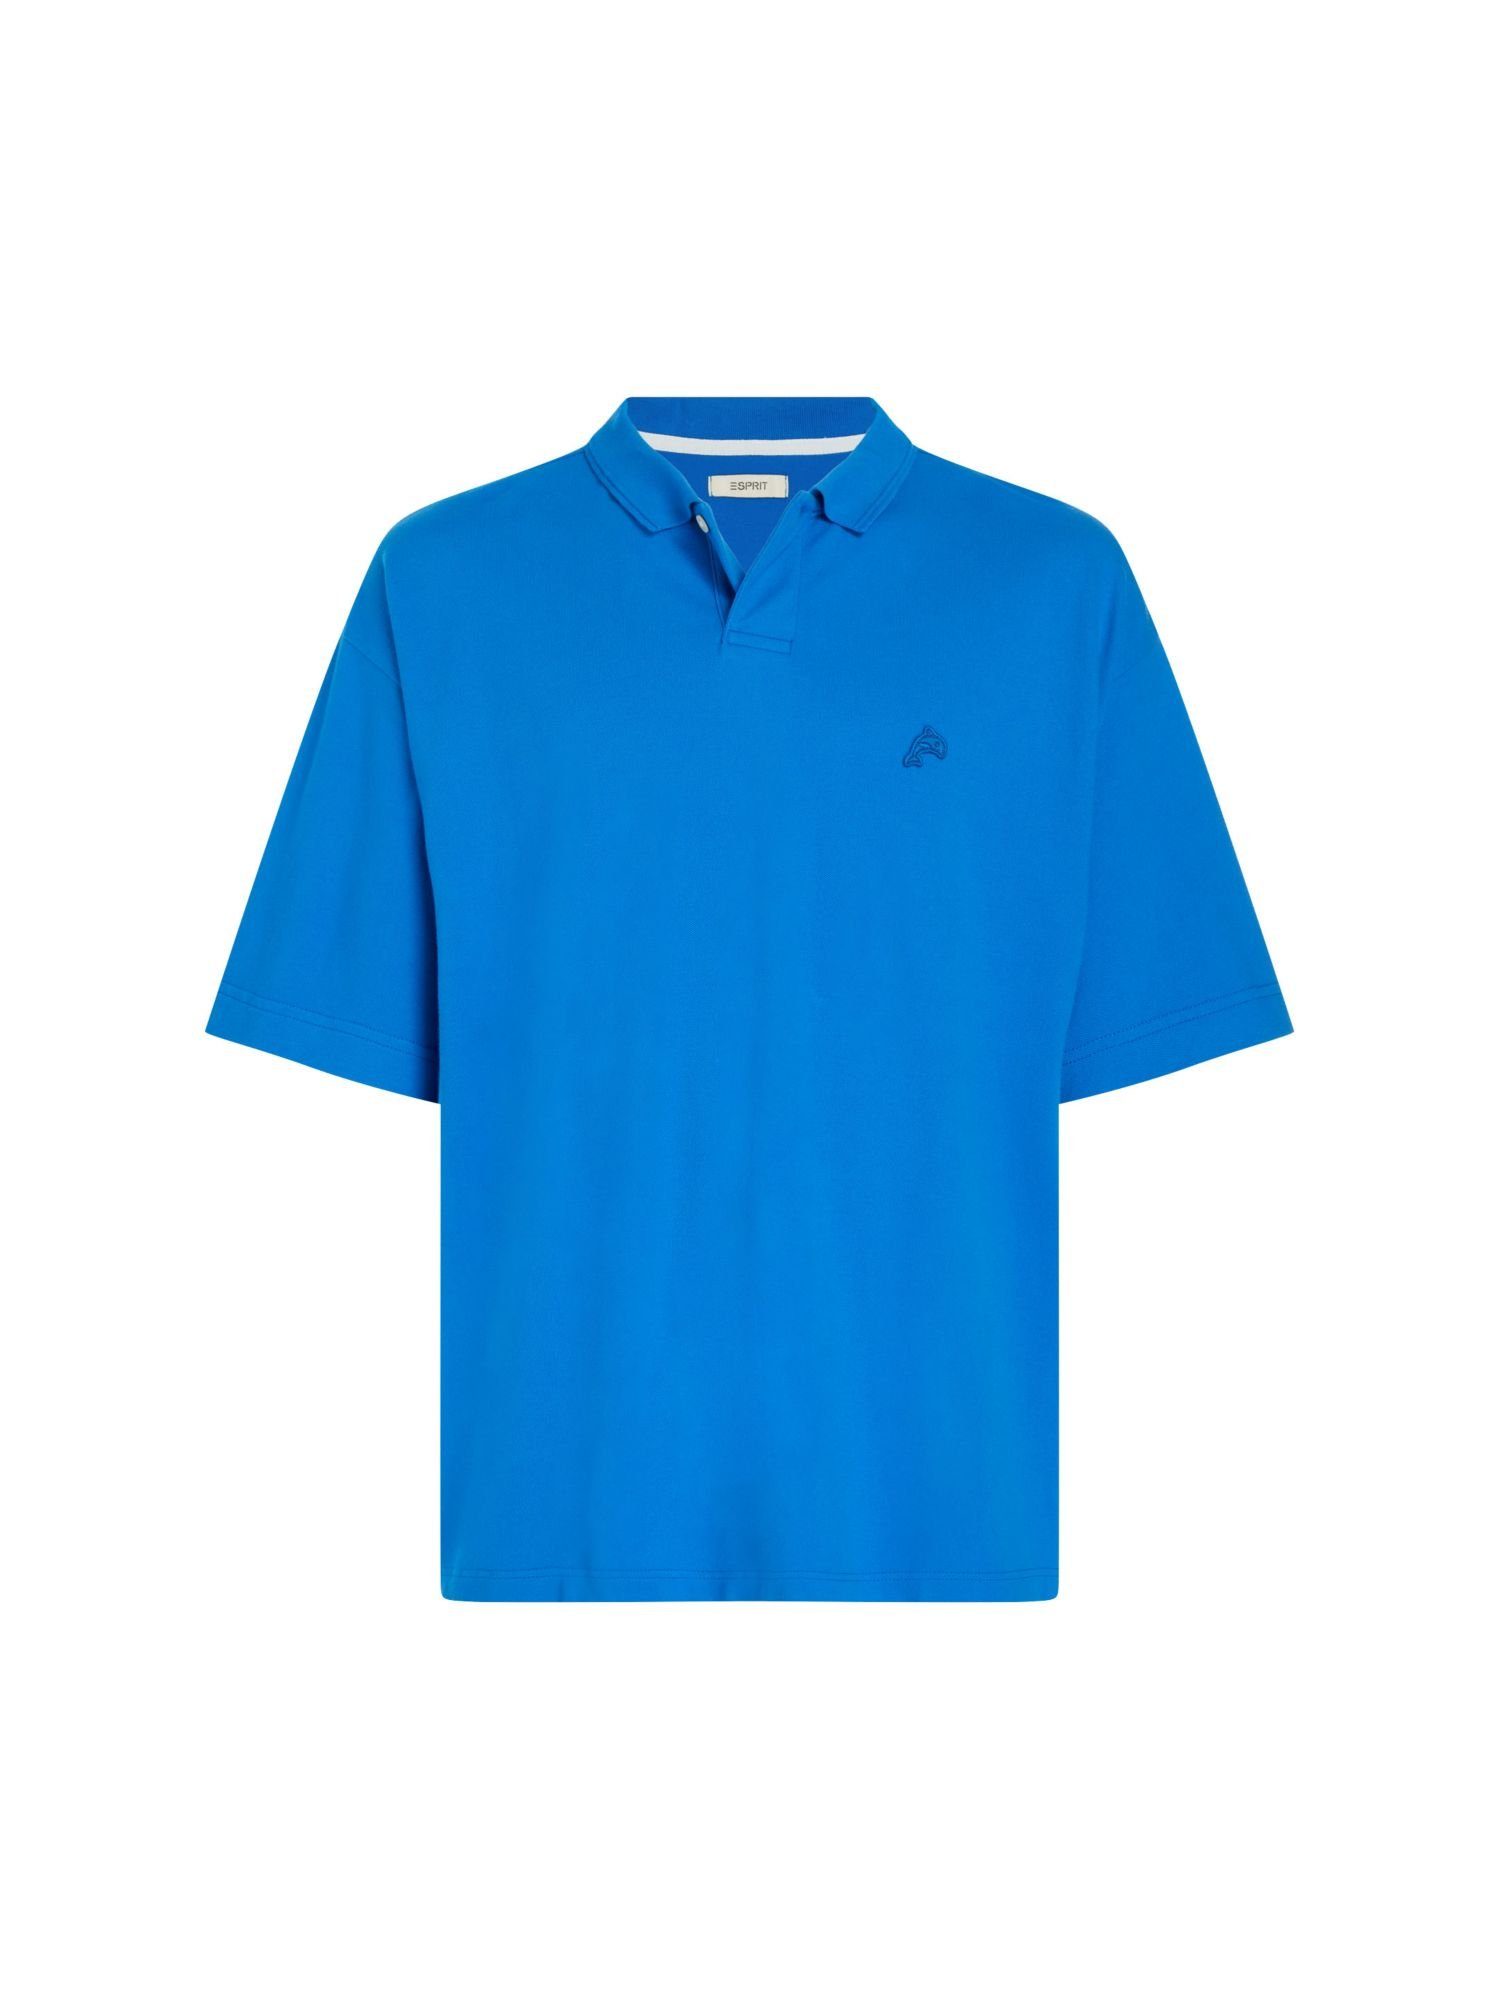 Esprit Poloshirt Relaxed Fit Poloshirt mit Dolphin-Badge BLUE